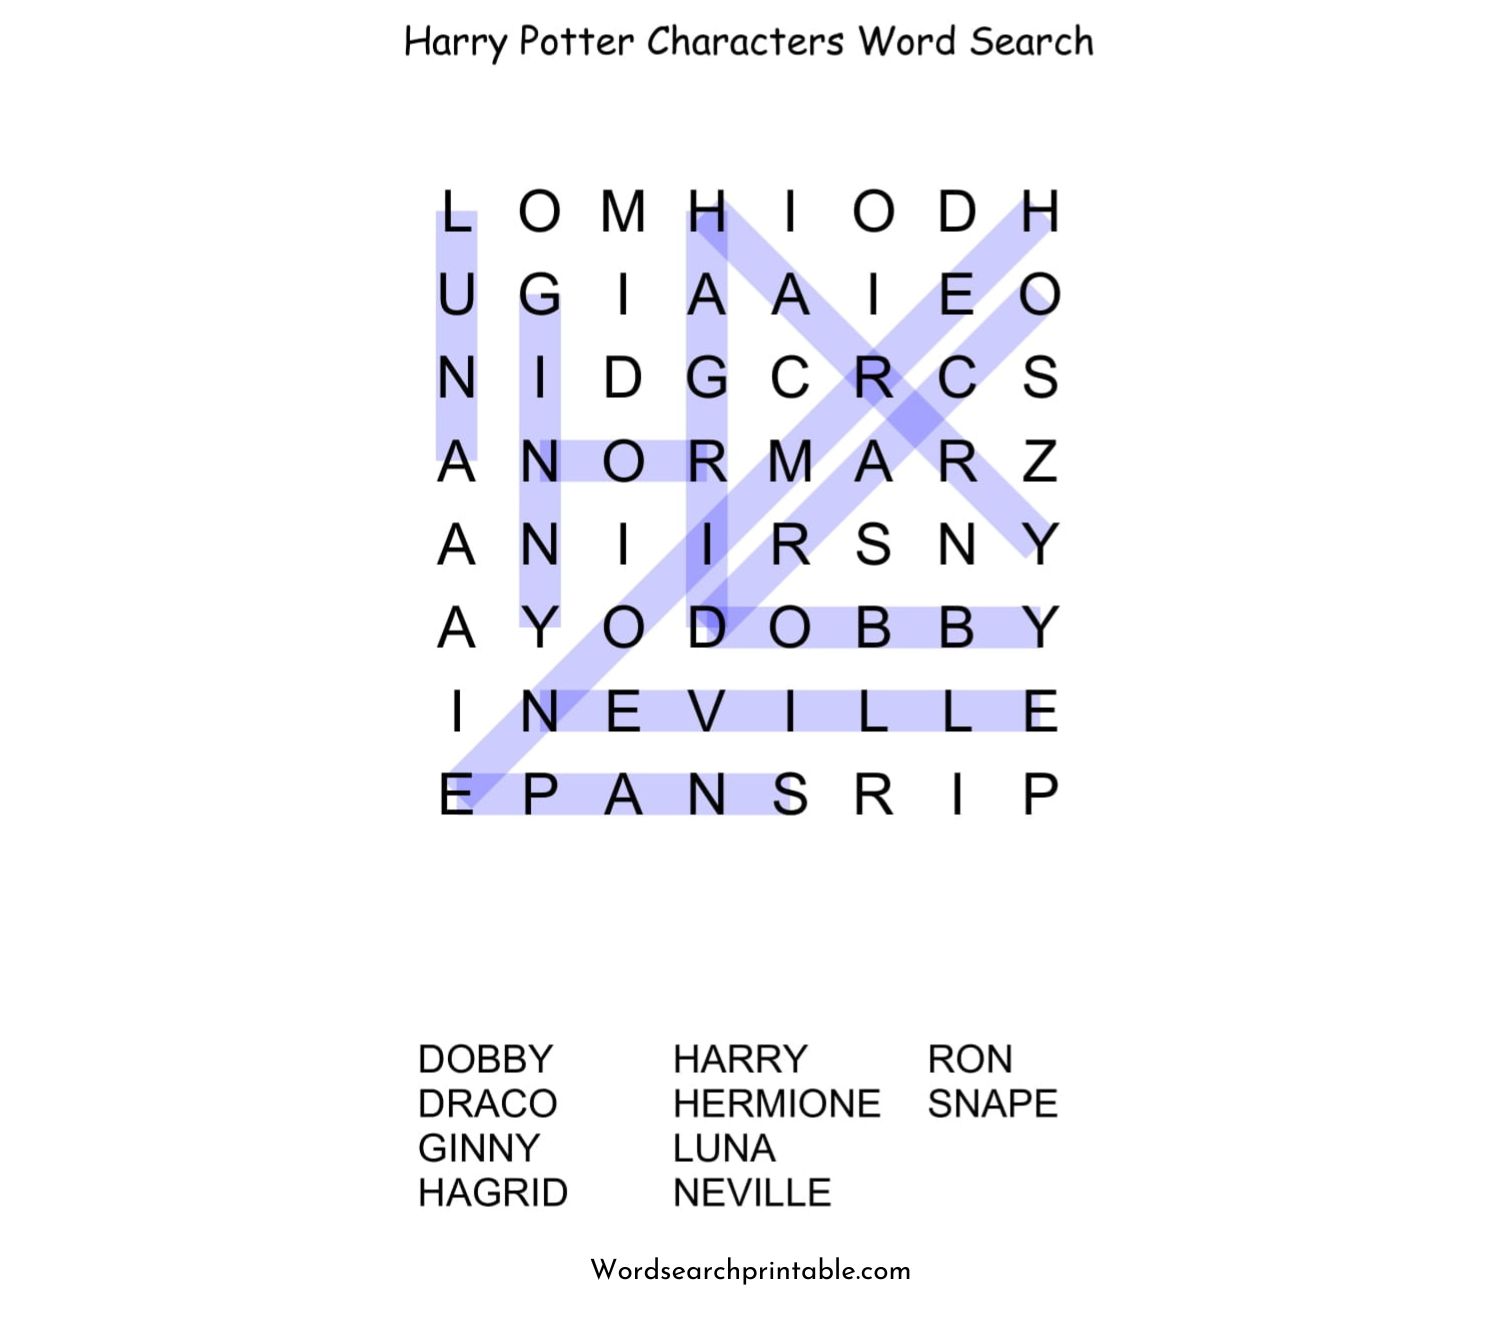 harry potter characters word search puzzle solution